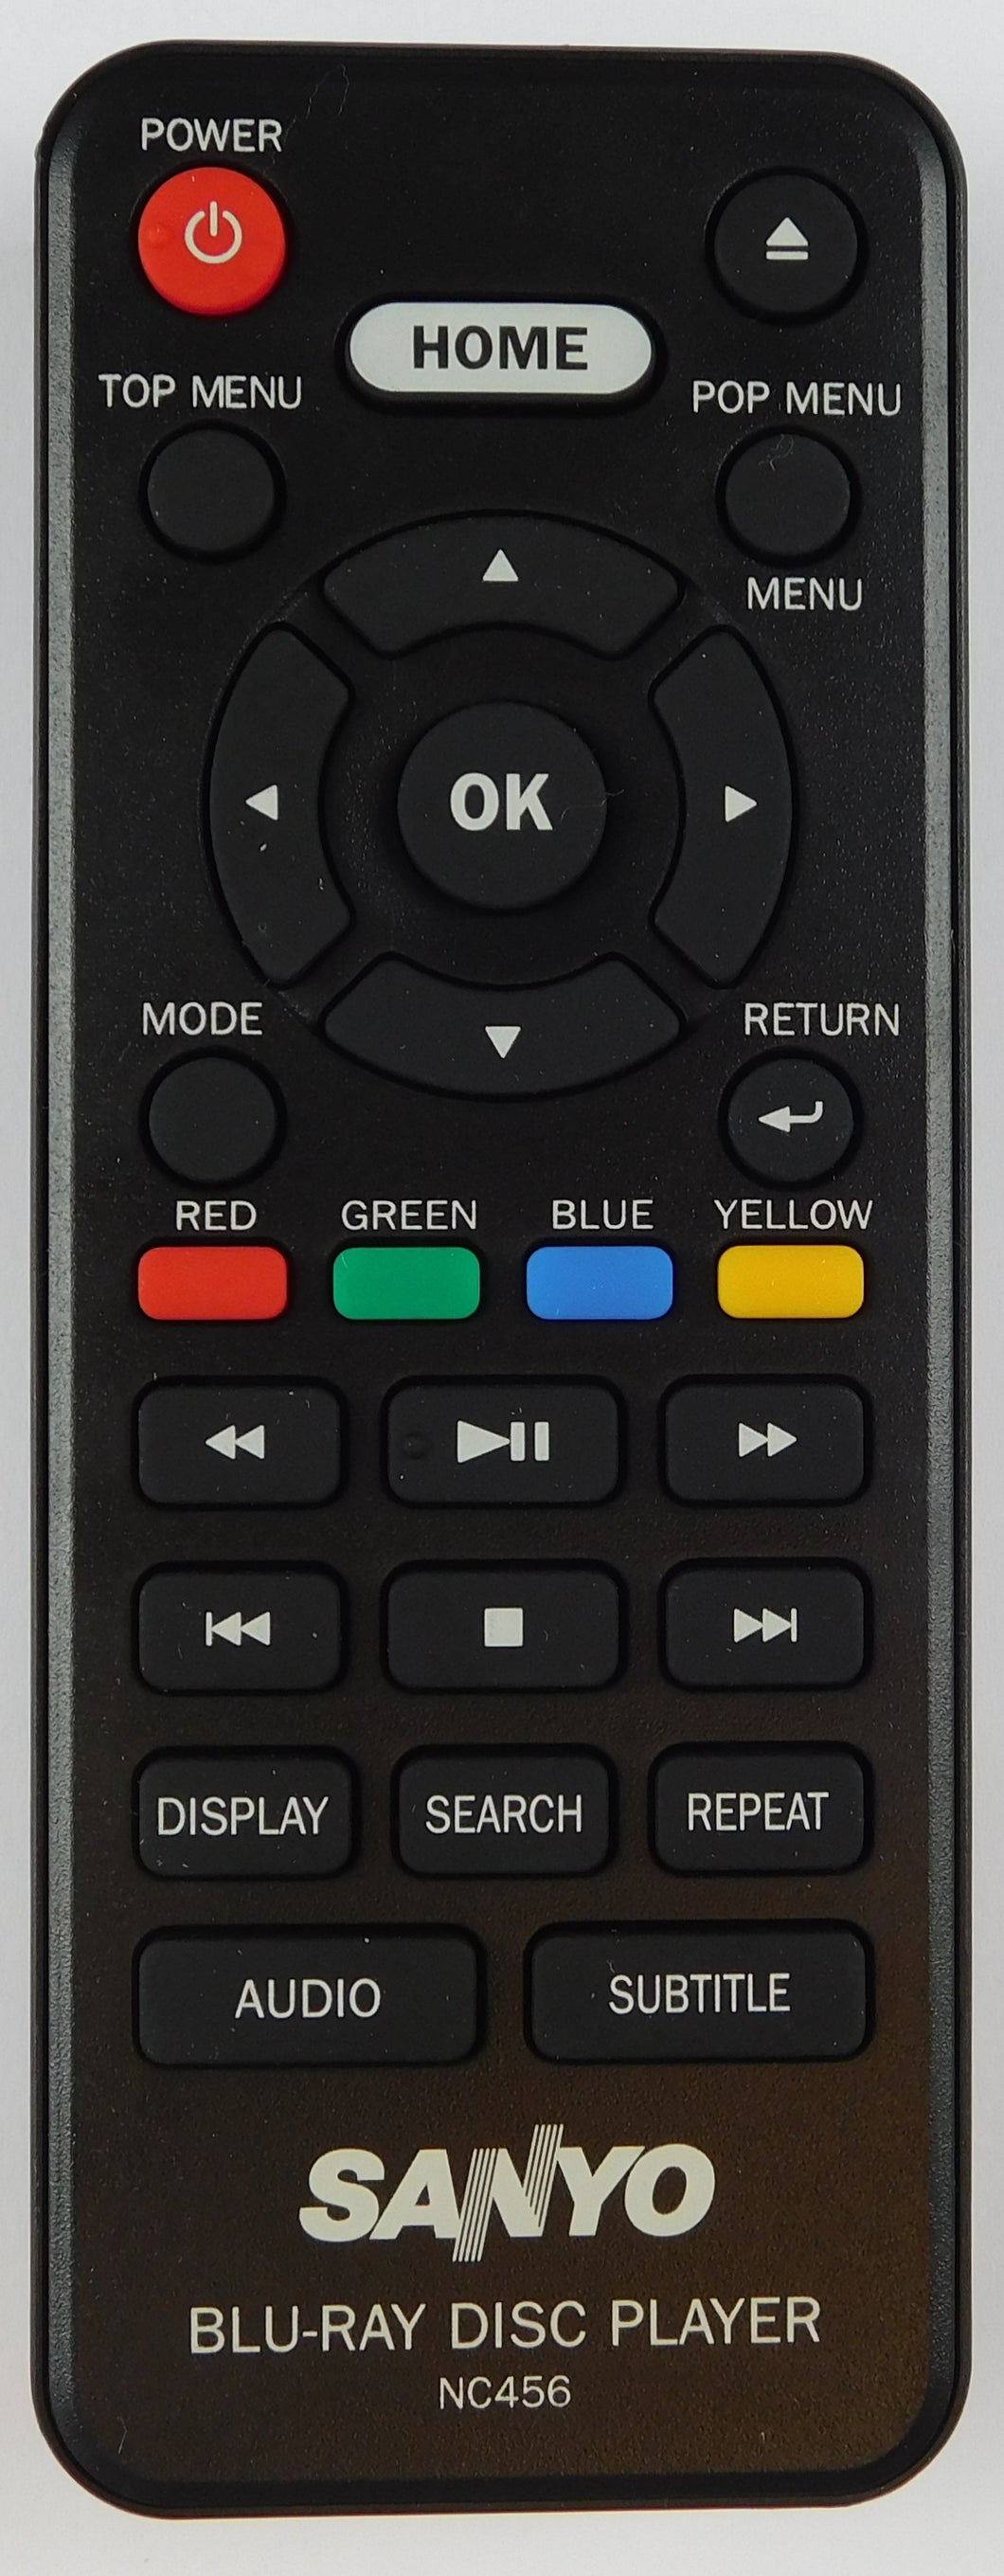 OEM replacement remote control for Sanyo Blu-ray players NC453UL